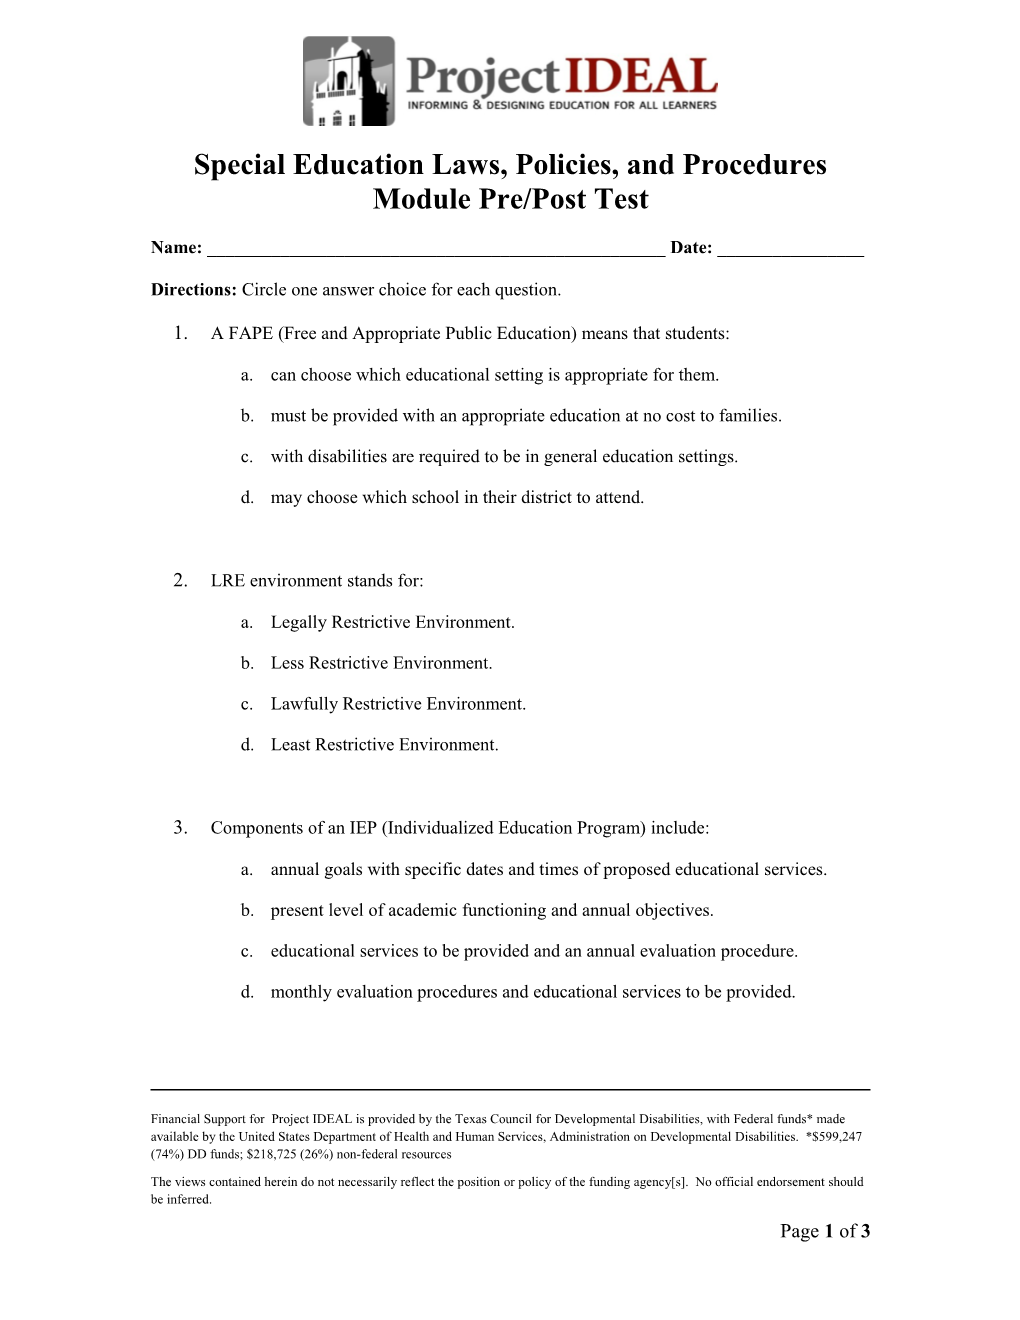 Special Education Laws, Policies, and Procedures Module Pre/Post Test